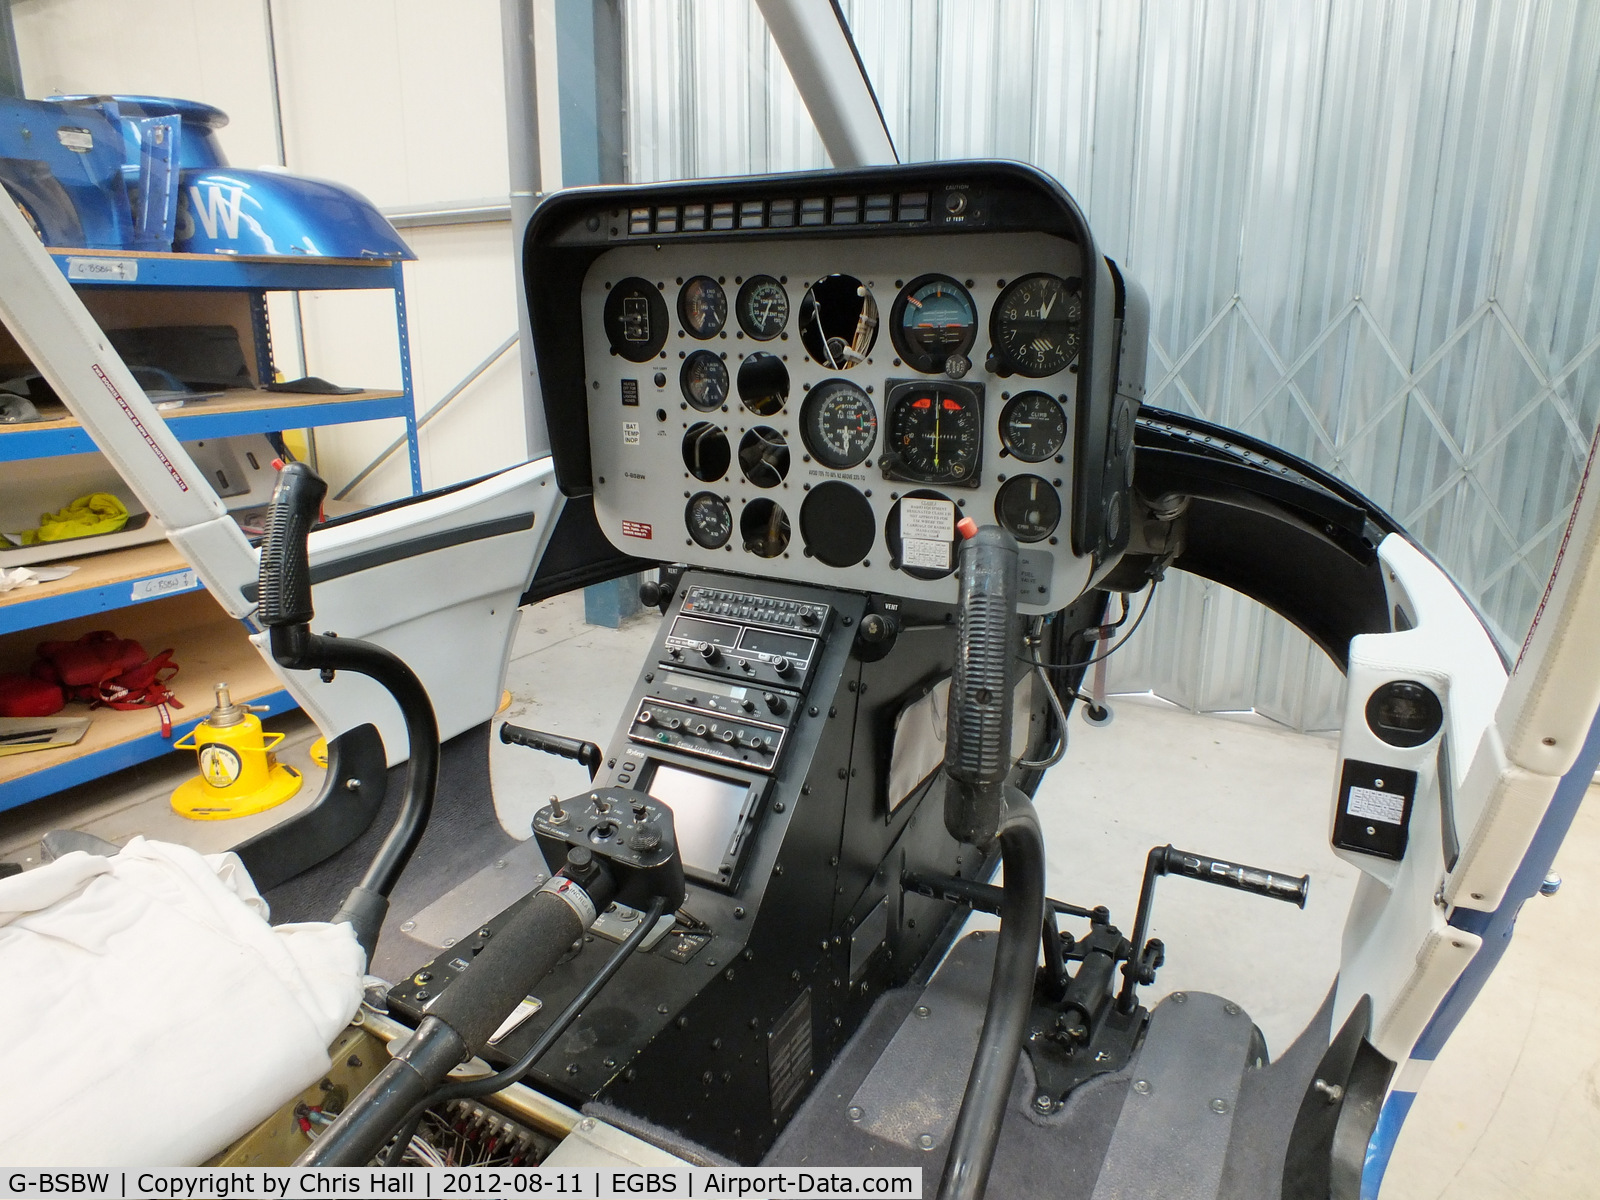 G-BSBW, 1982 Bell 206B JetRanger III C/N 3664, inside the Tiger Helicopter's Hangar at Shobdon Airfield, Herefordshire